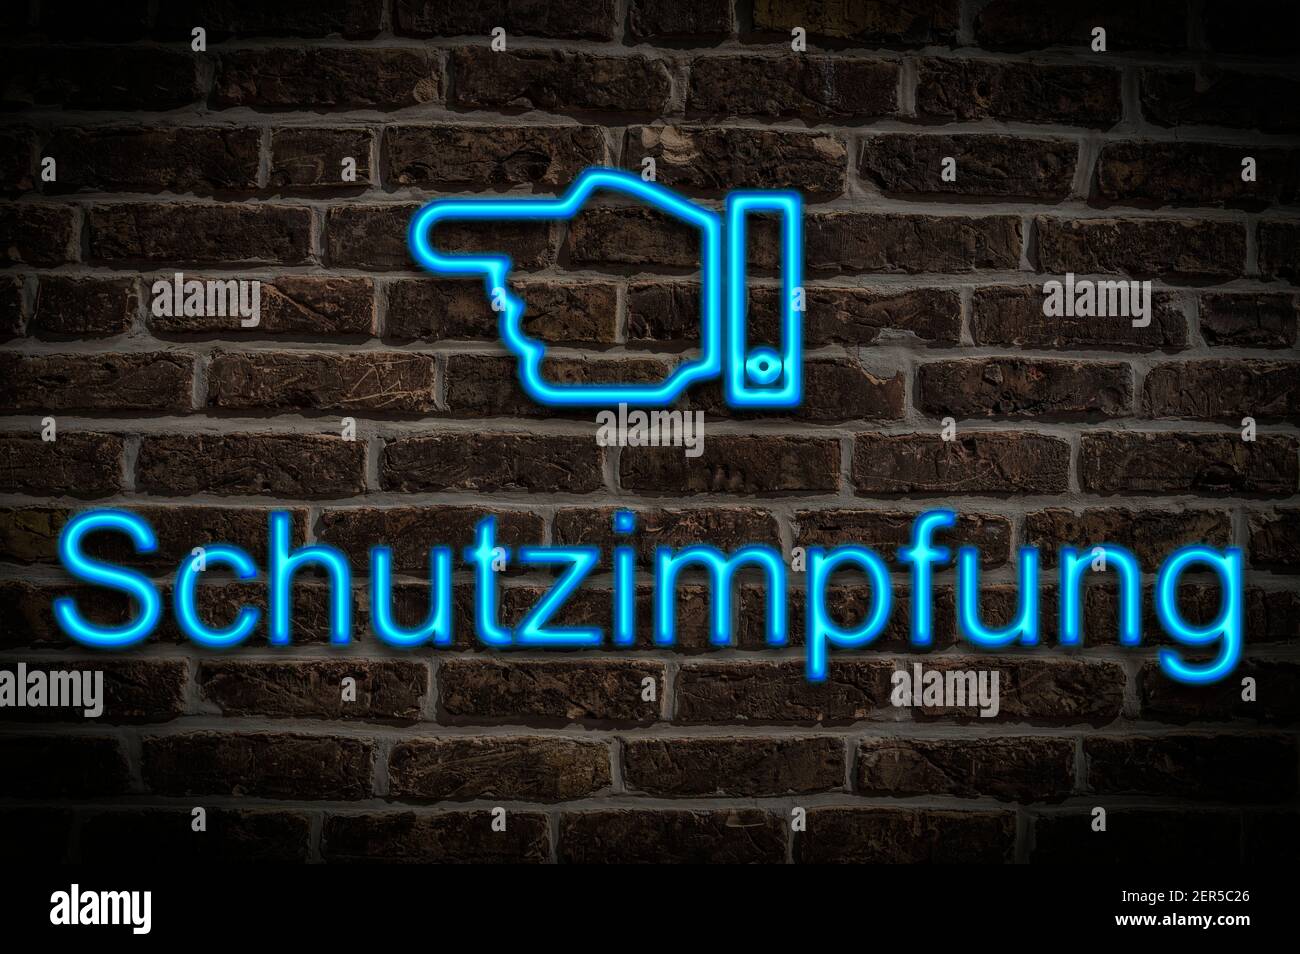 Detail photo of a neon sign on a wall with the inscription Schutzimpfung (protective vaccination) Stock Photo